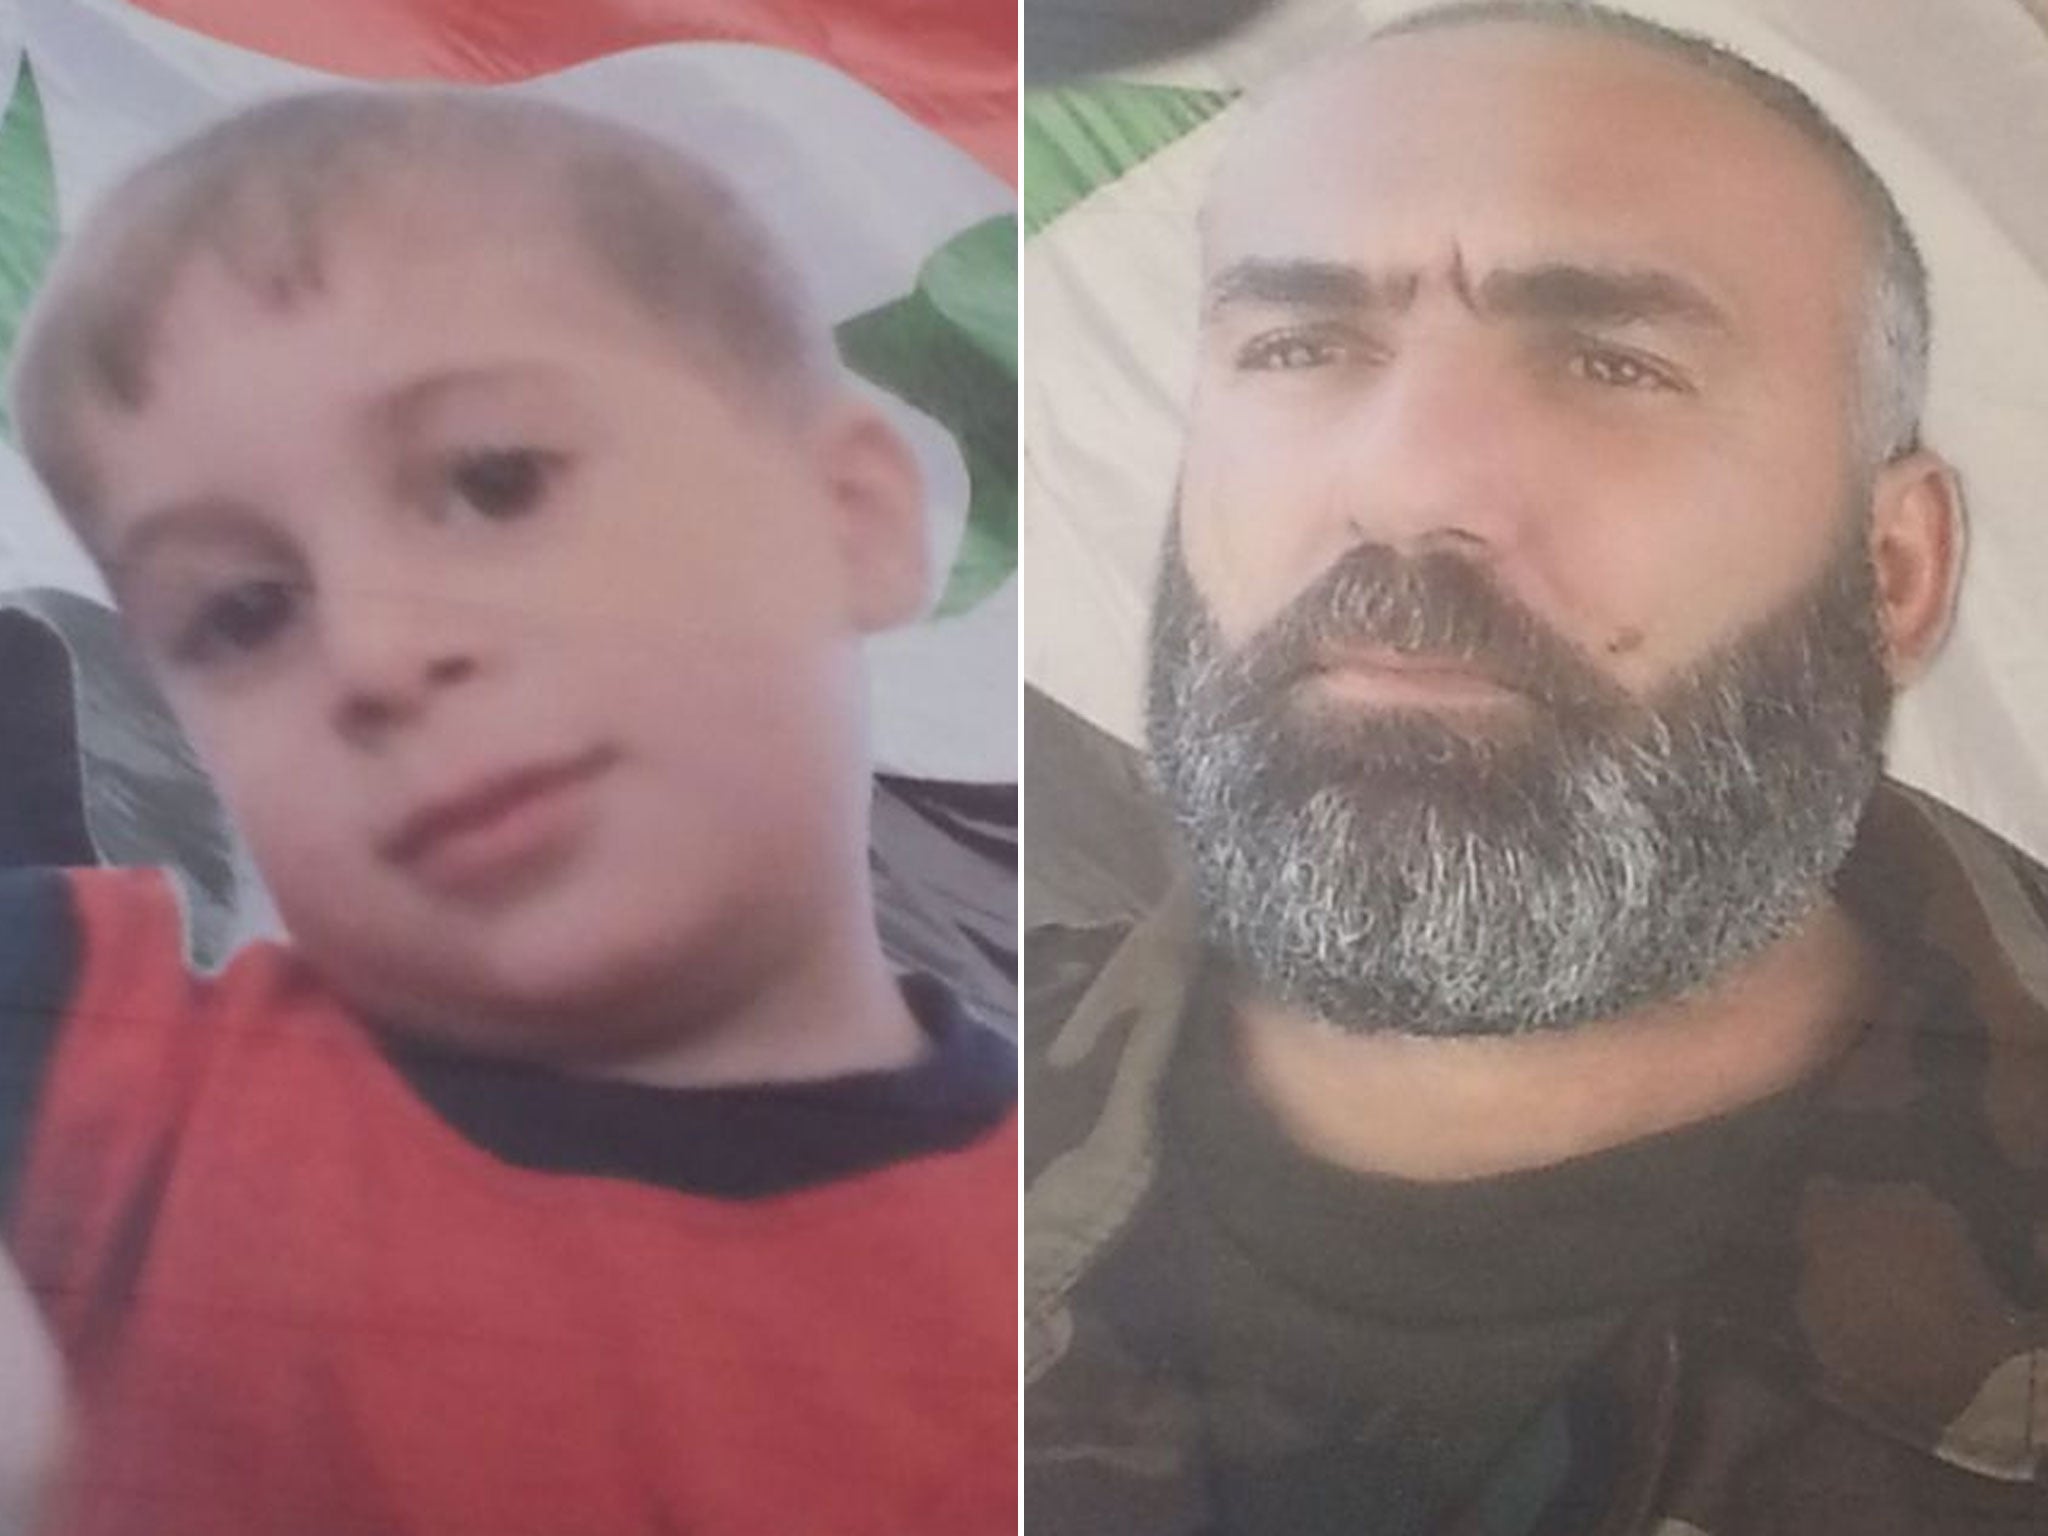 Younis Mustafa, the 39-year old army captain who died as he went shopping with his little boy on 21 February, six-year-old Ammar, left